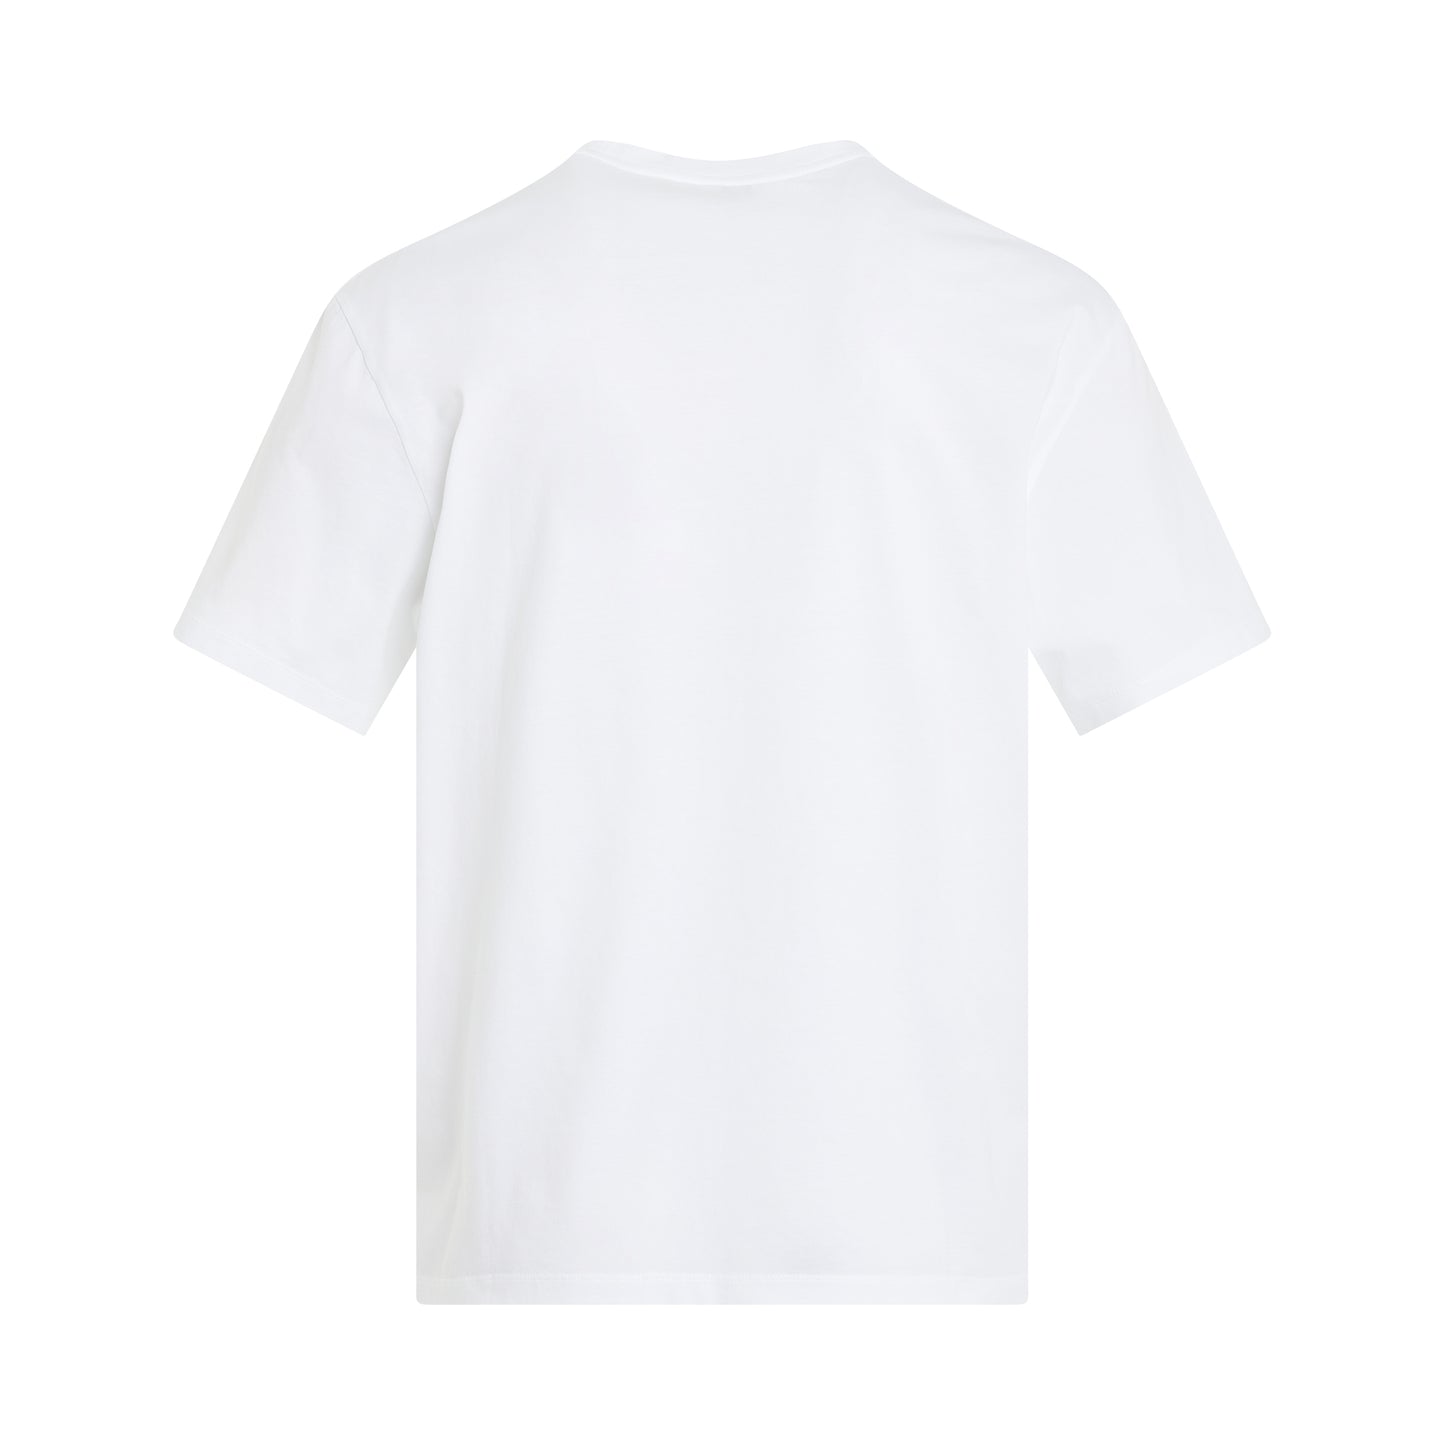 Embroidered Blurred Logo T-Shirt in White/Multicolour